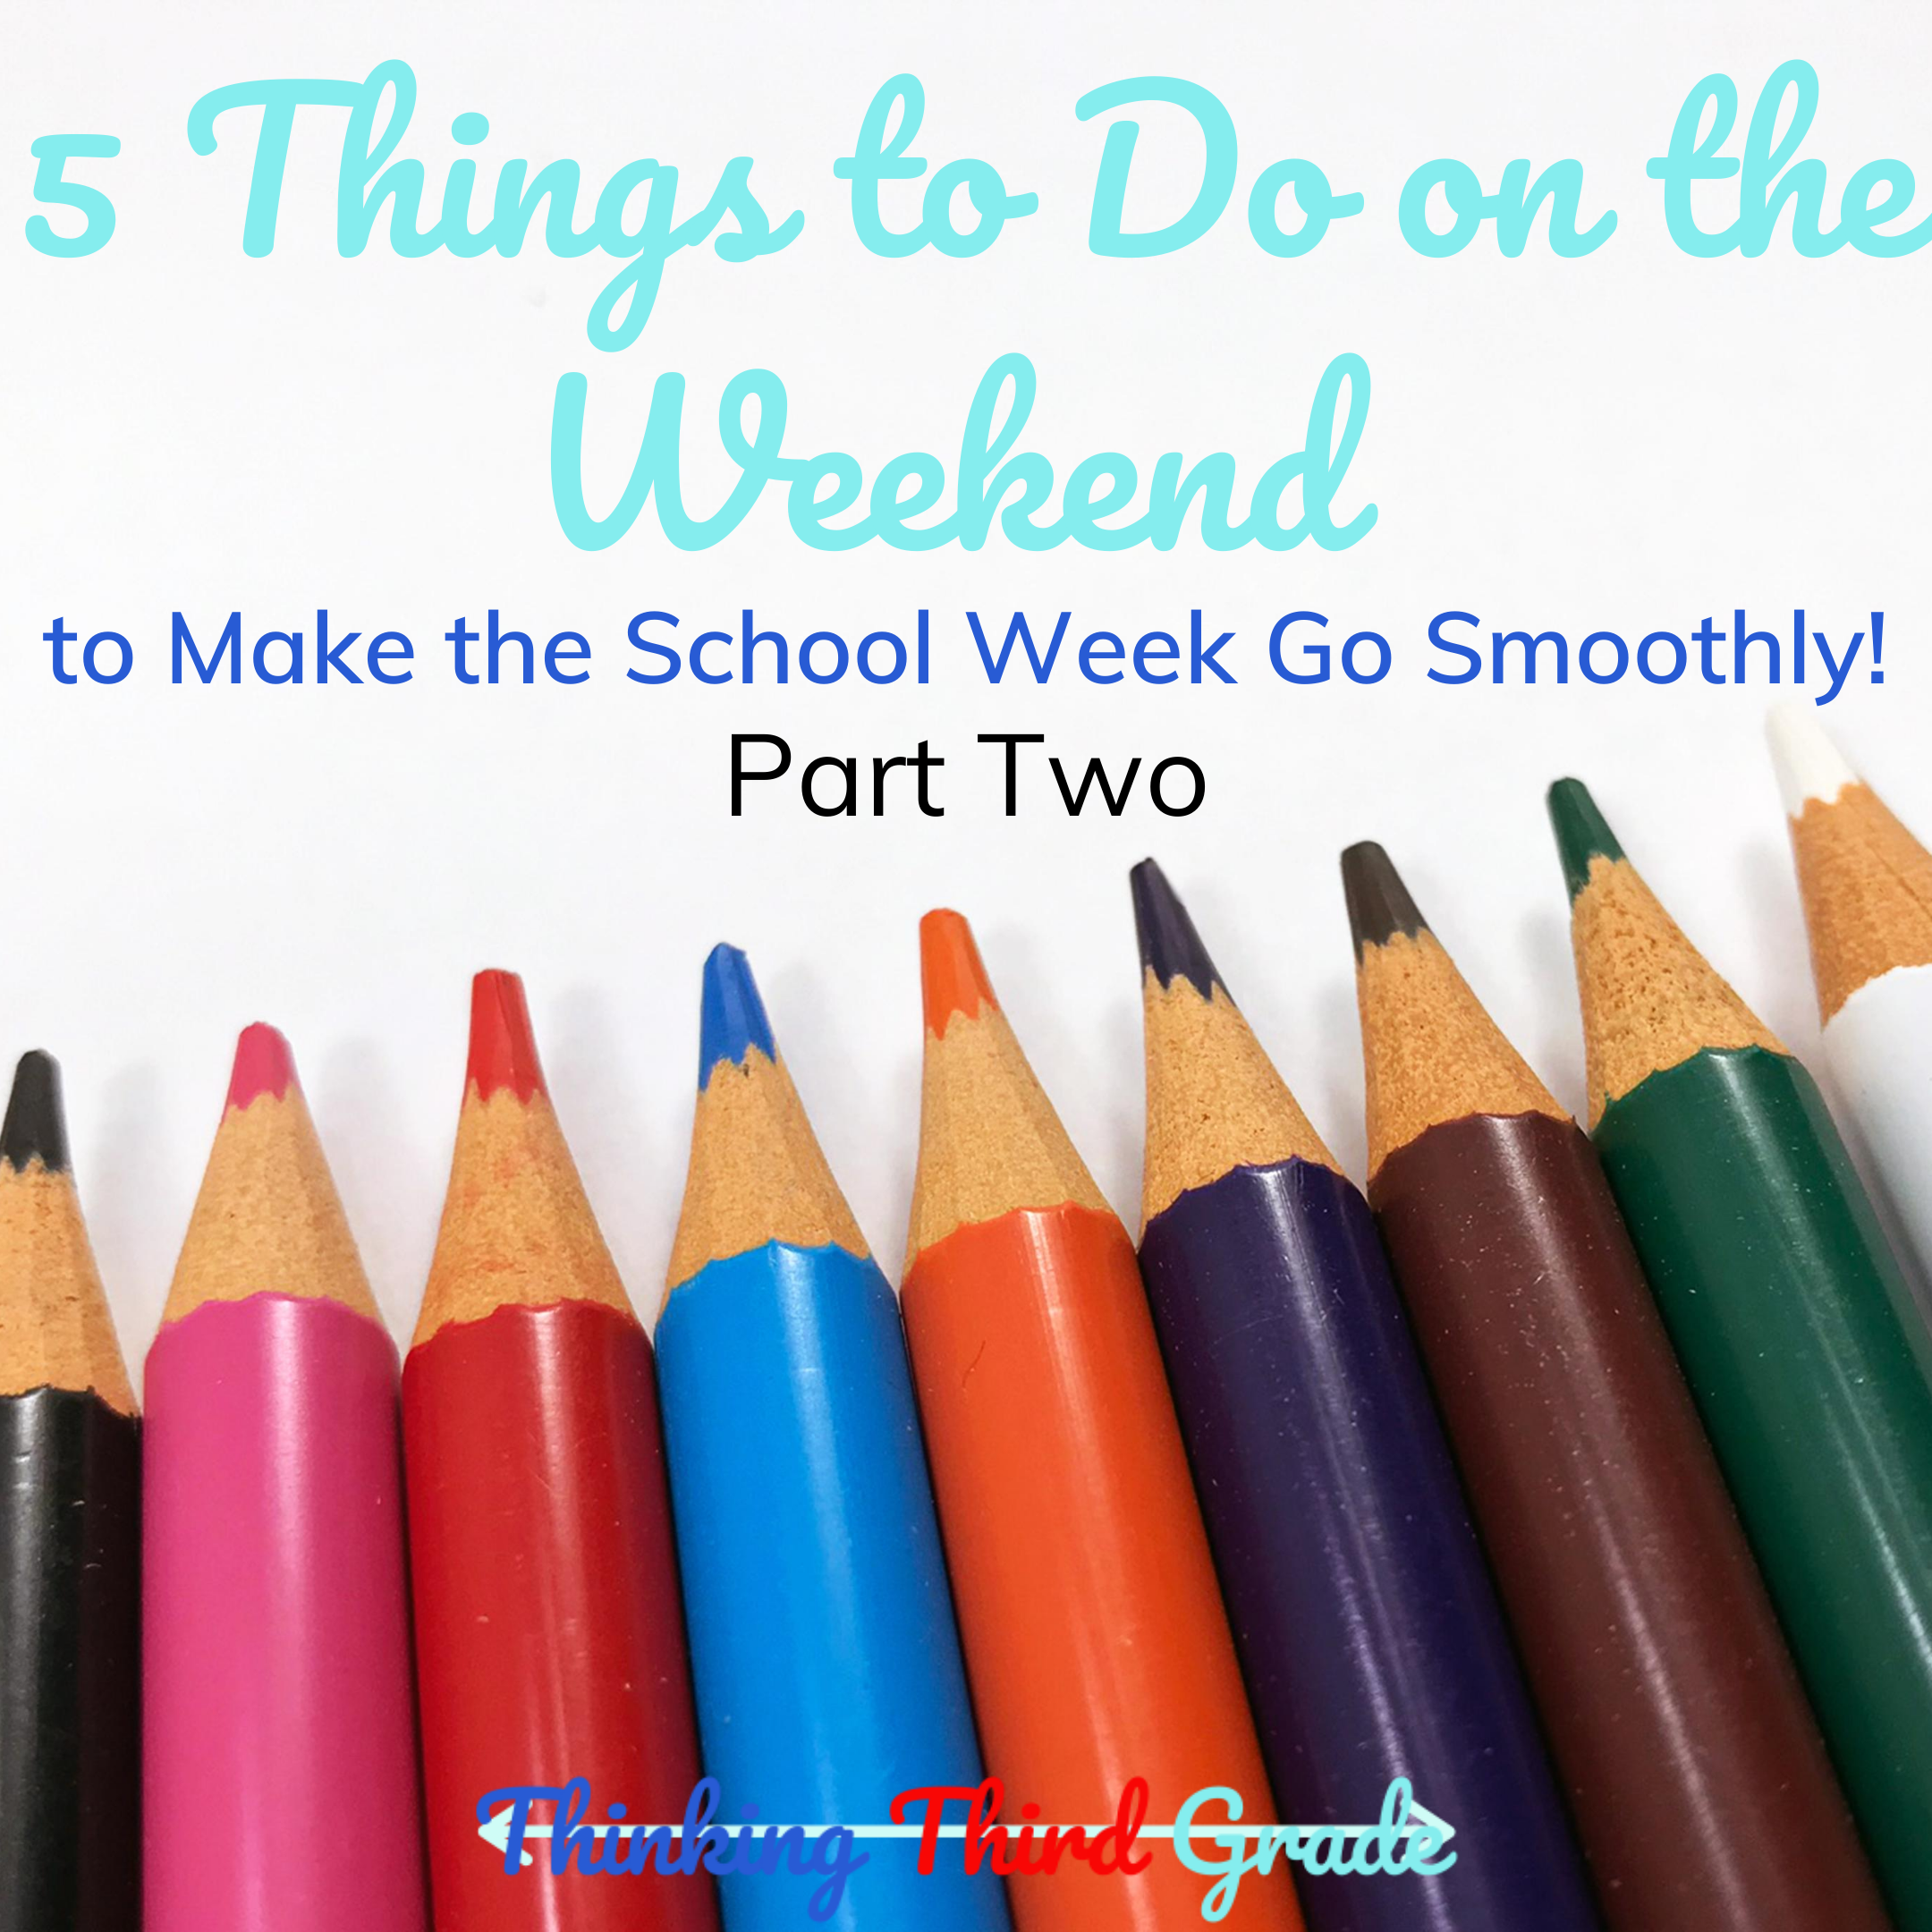 5 Things to Do on the Weekend to Make the School Week Go More Smoothly Part Two